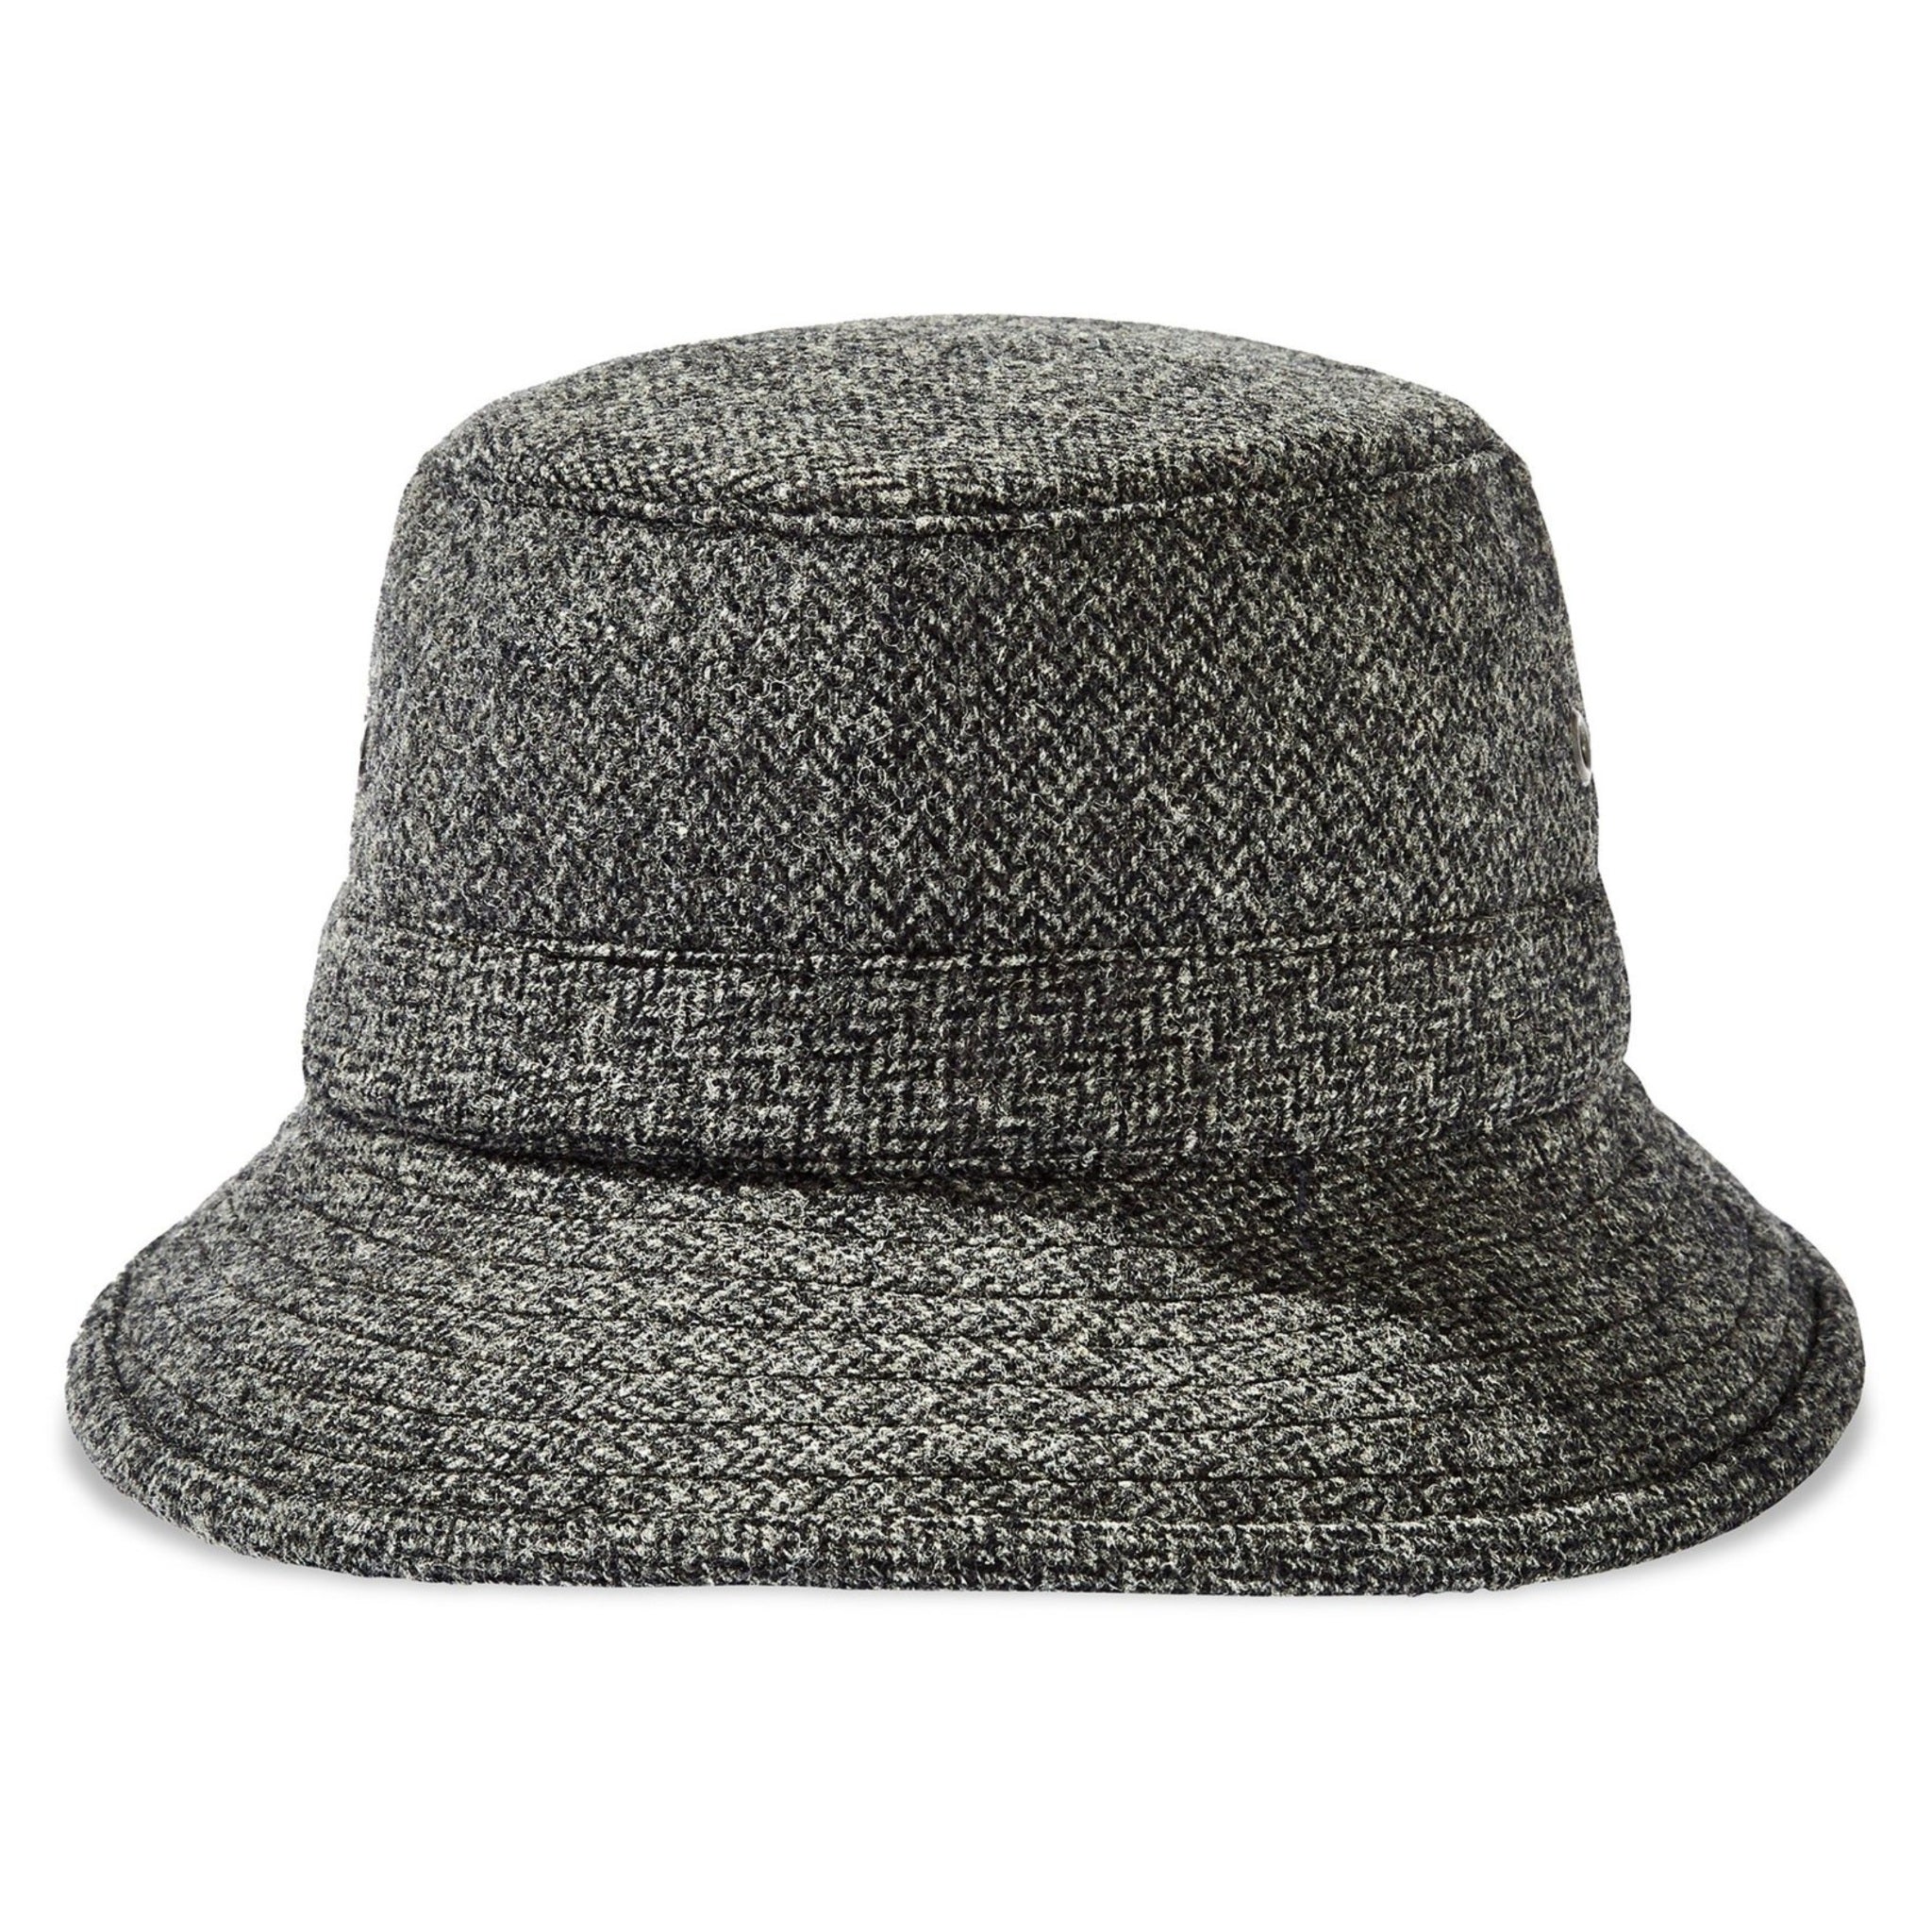 The Hat Shop Tilley Wool Warmth Bucket Hat Charcoal